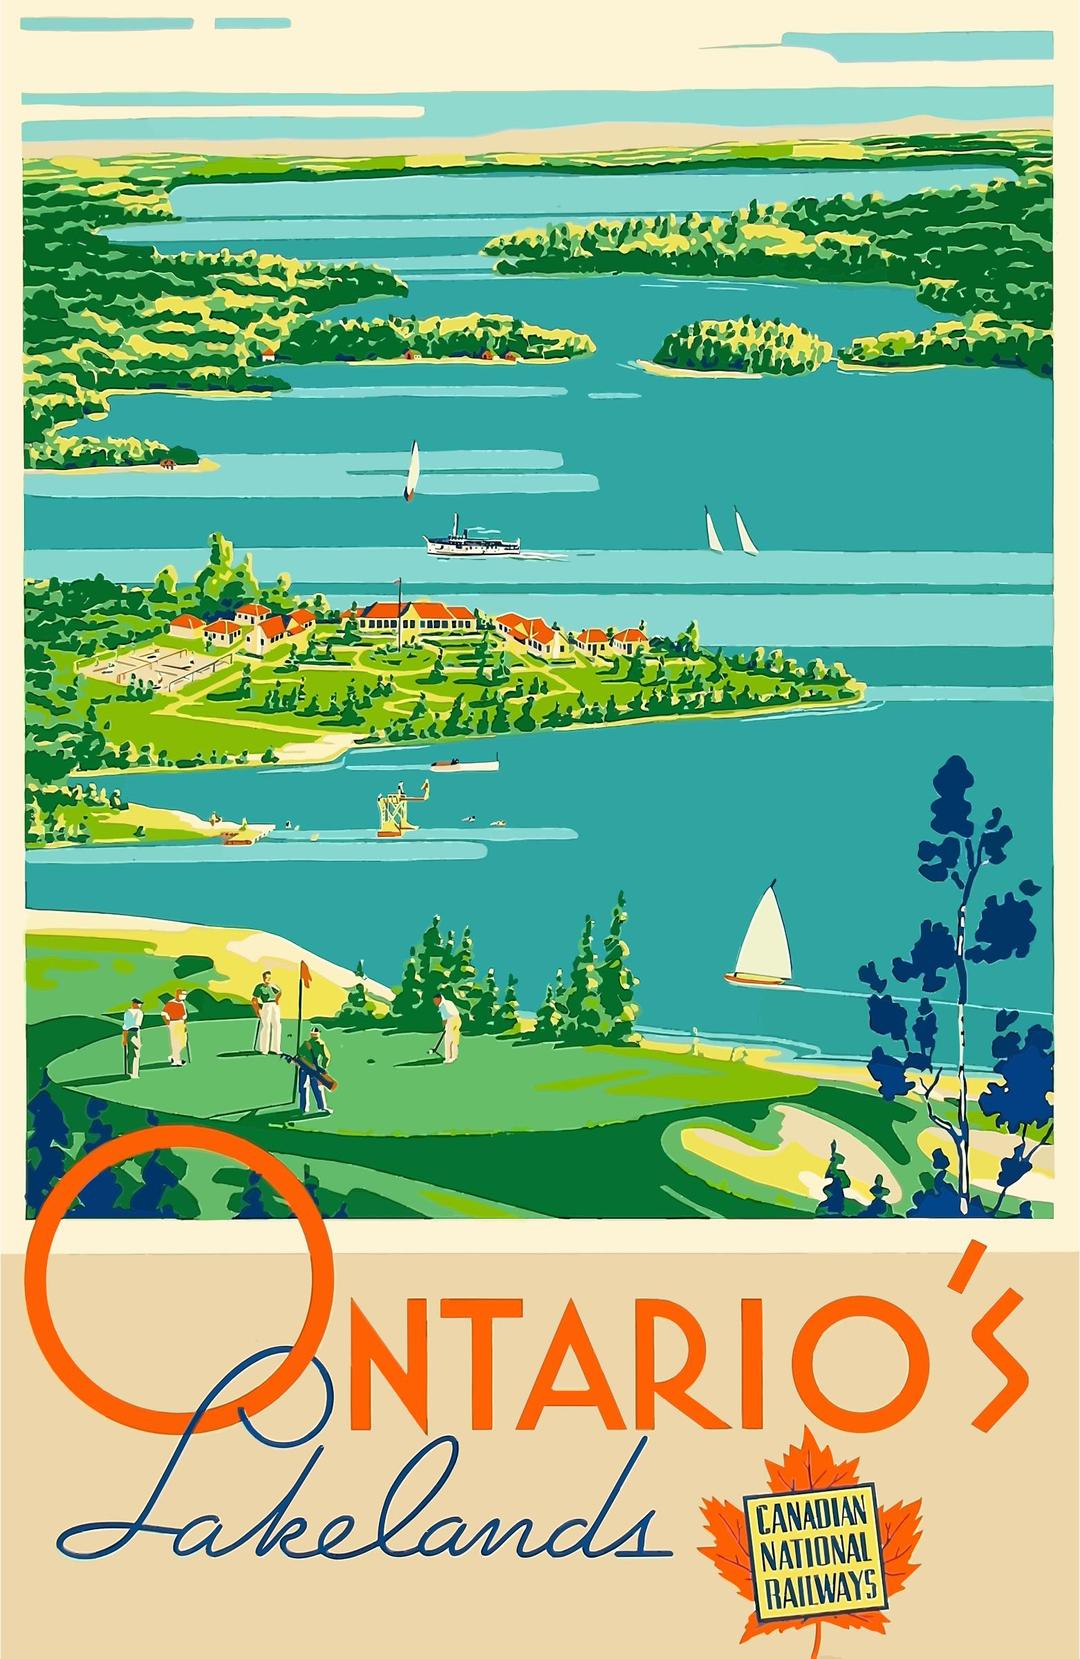 Vintage Travel Poster Ontario Canada png transparent